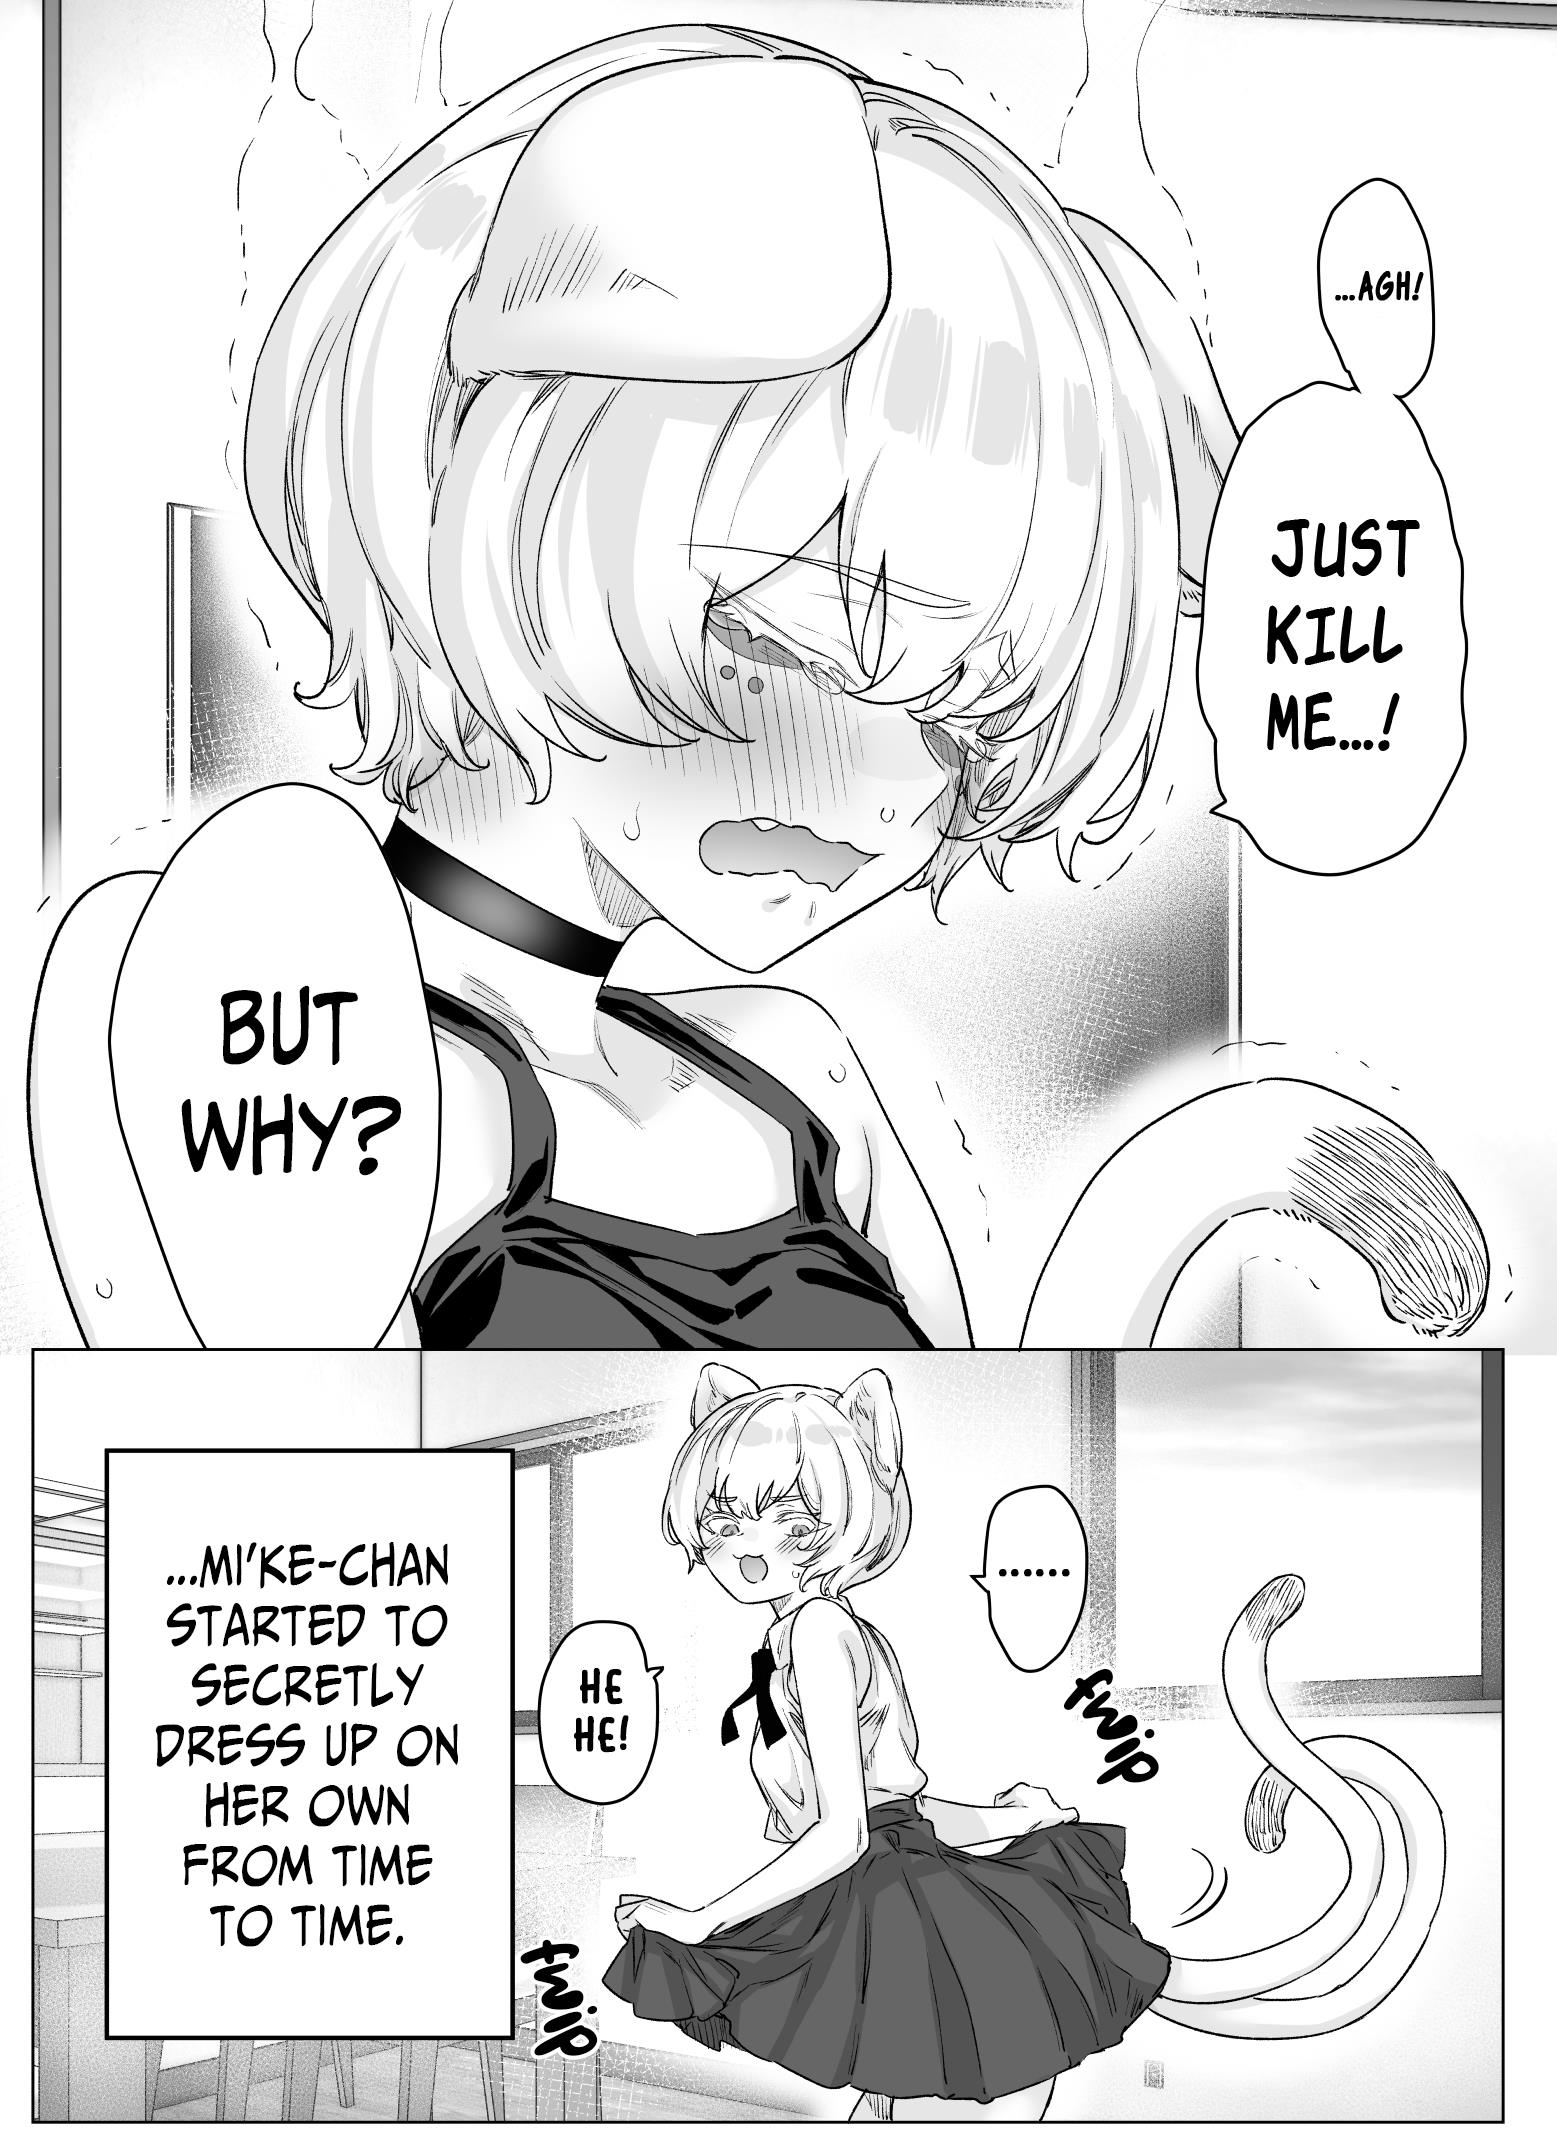 Even Though She's The Losing Heroine, The Bakeneko-Chan Remains Undaunted Chapter 4 #4